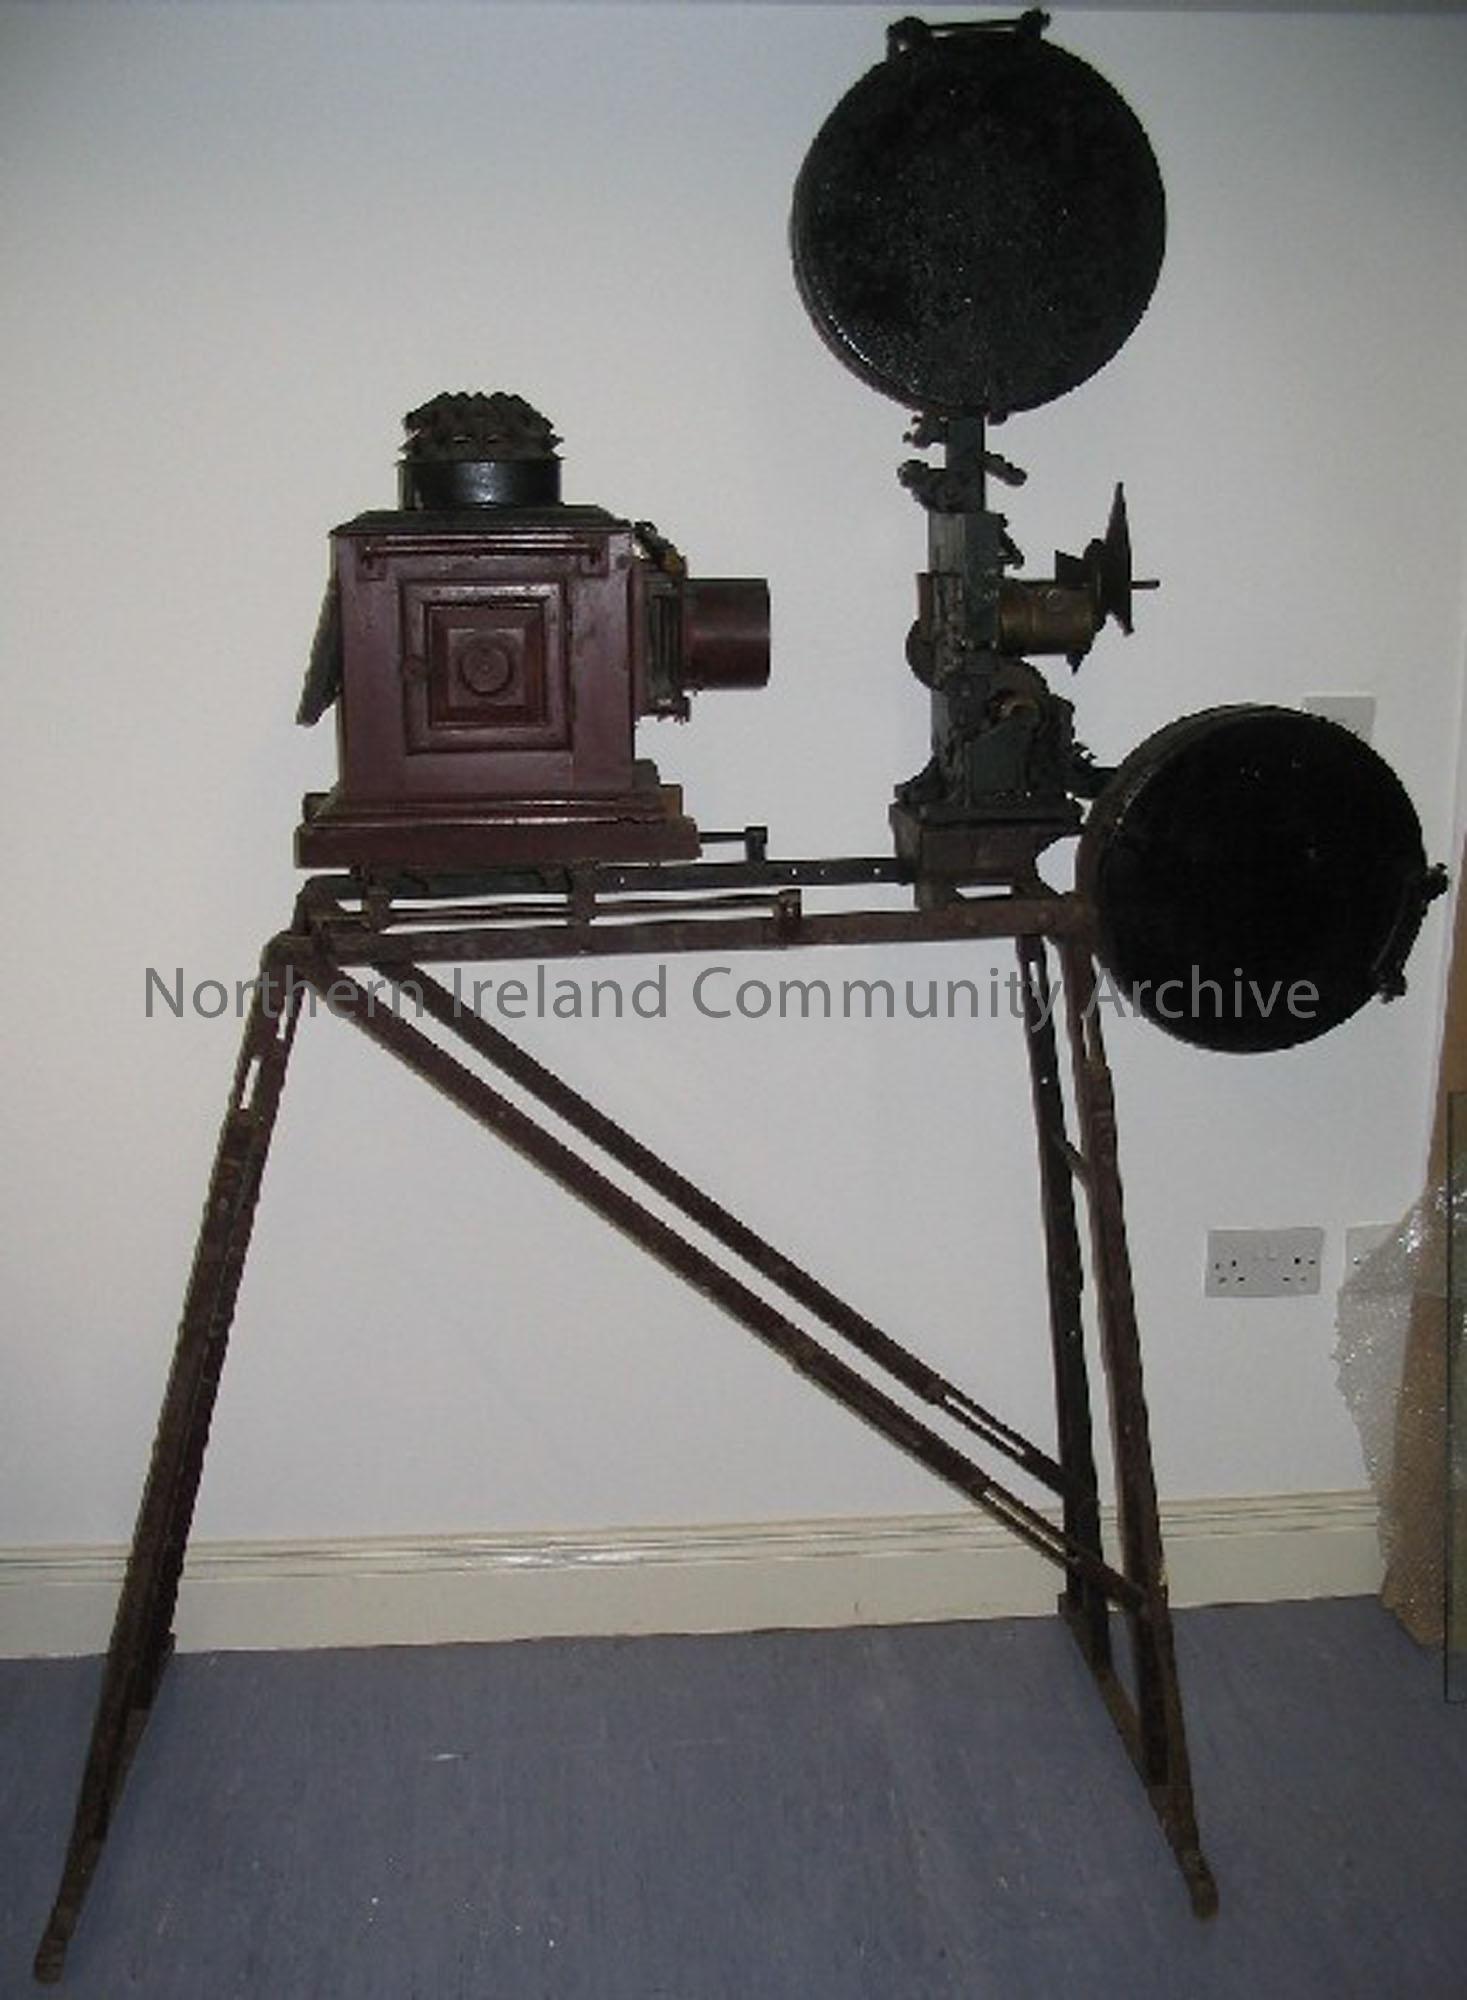 Gaumont cinema projector. This was used for playing silent, black and white films in the 1920s in St. Patrick’s Hall, Castle Street, Ballymoney